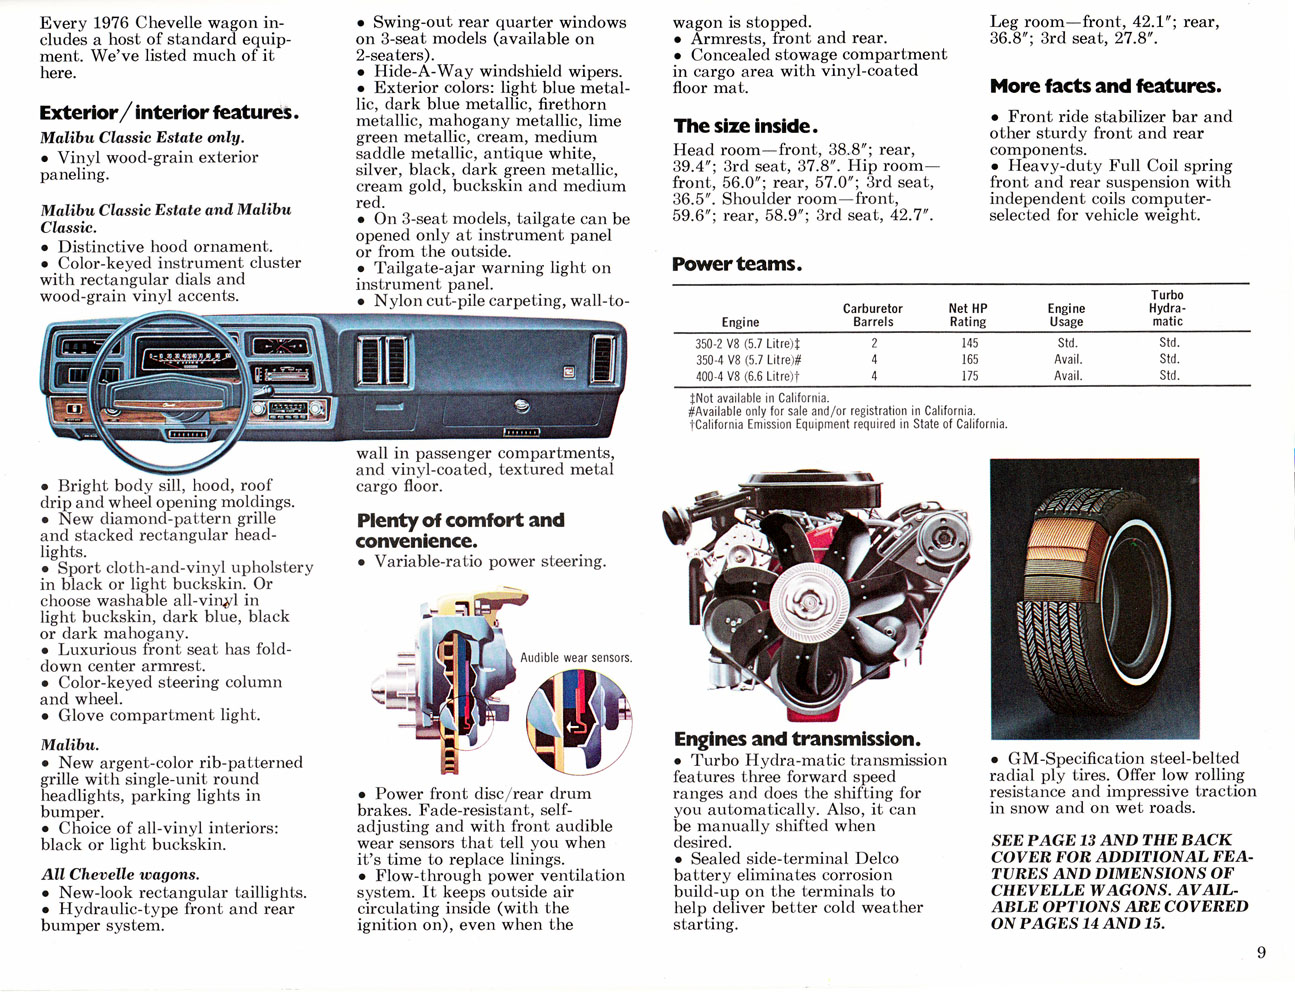 1976 Chevrolet Wagons Brochure Page 8